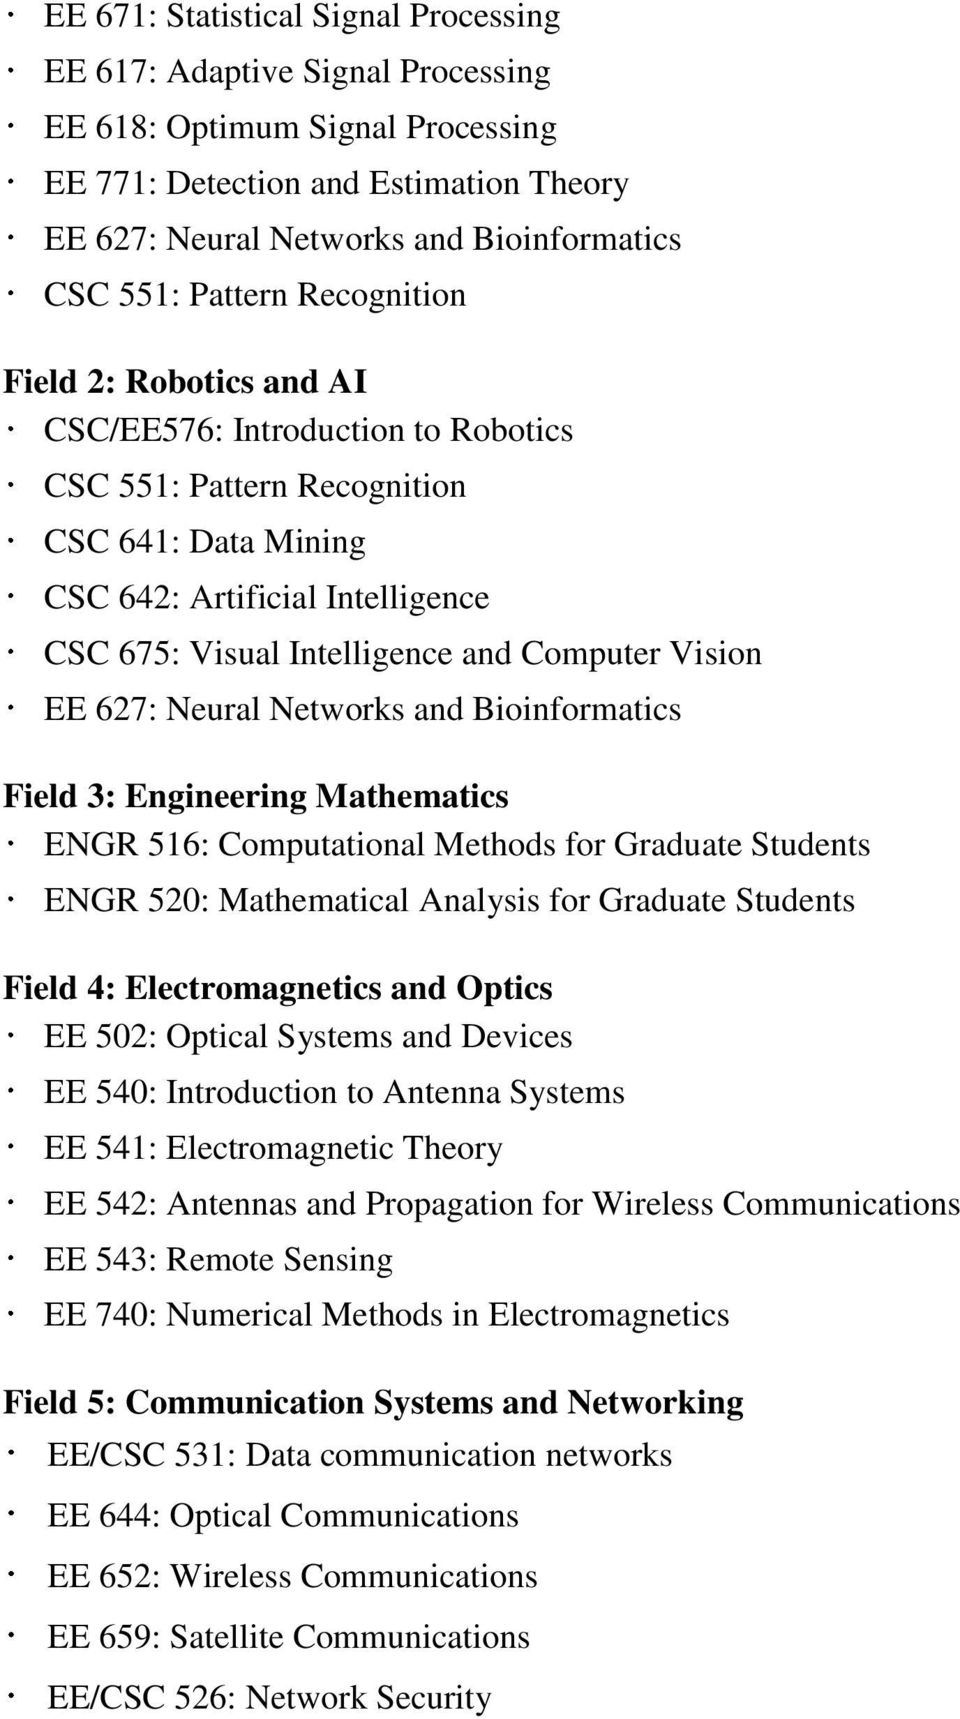 Computational Methods for Graduate Students ENGR 520: Mathematical Analysis for Graduate Students Field 4: Electromagnetics and Optics EE 502: Optical Systems and Devices EE 540: Introduction to